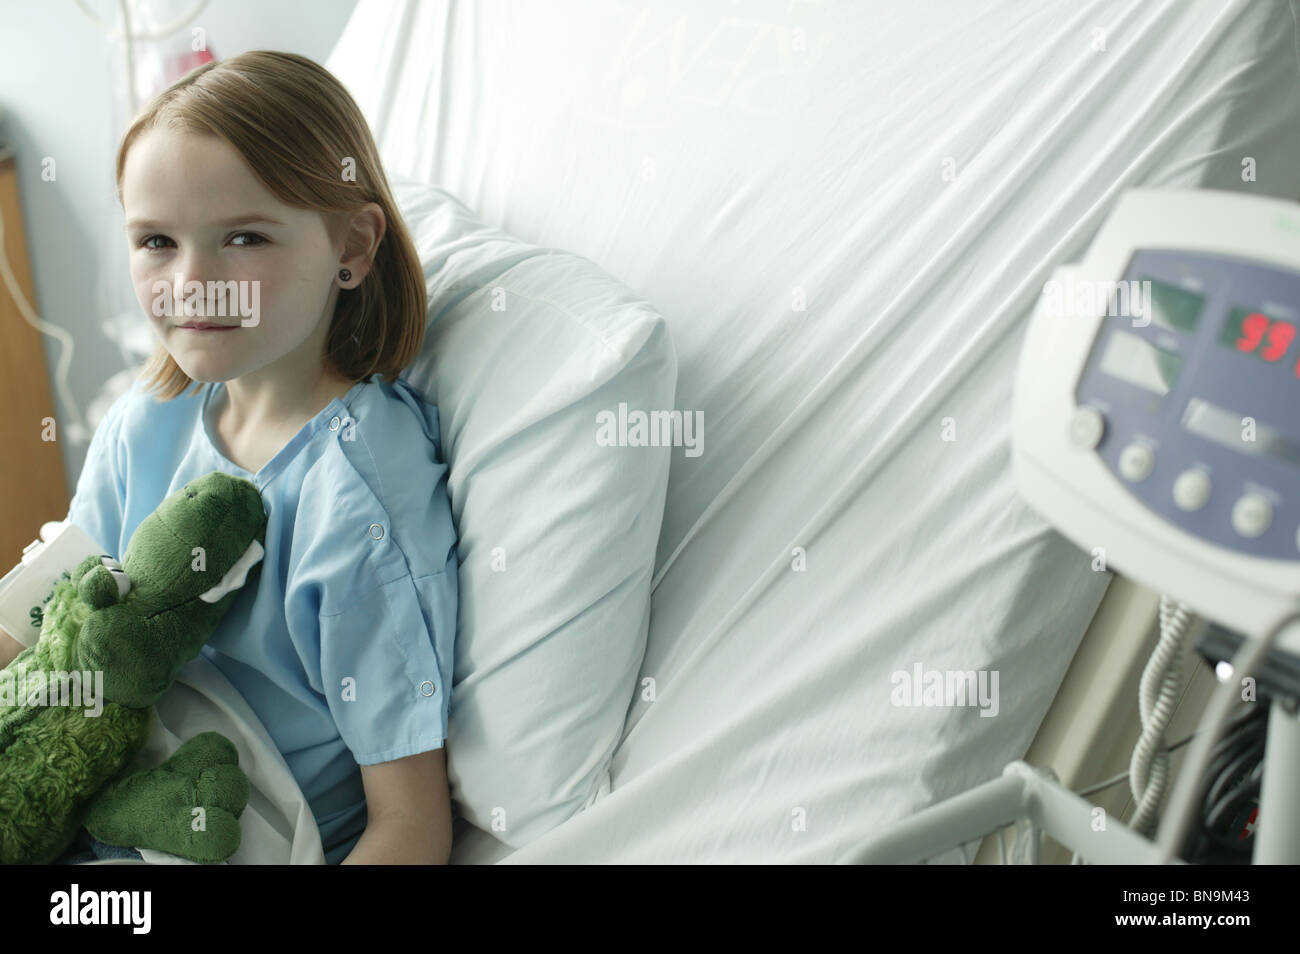 young girl in hospital bed Stock Photo